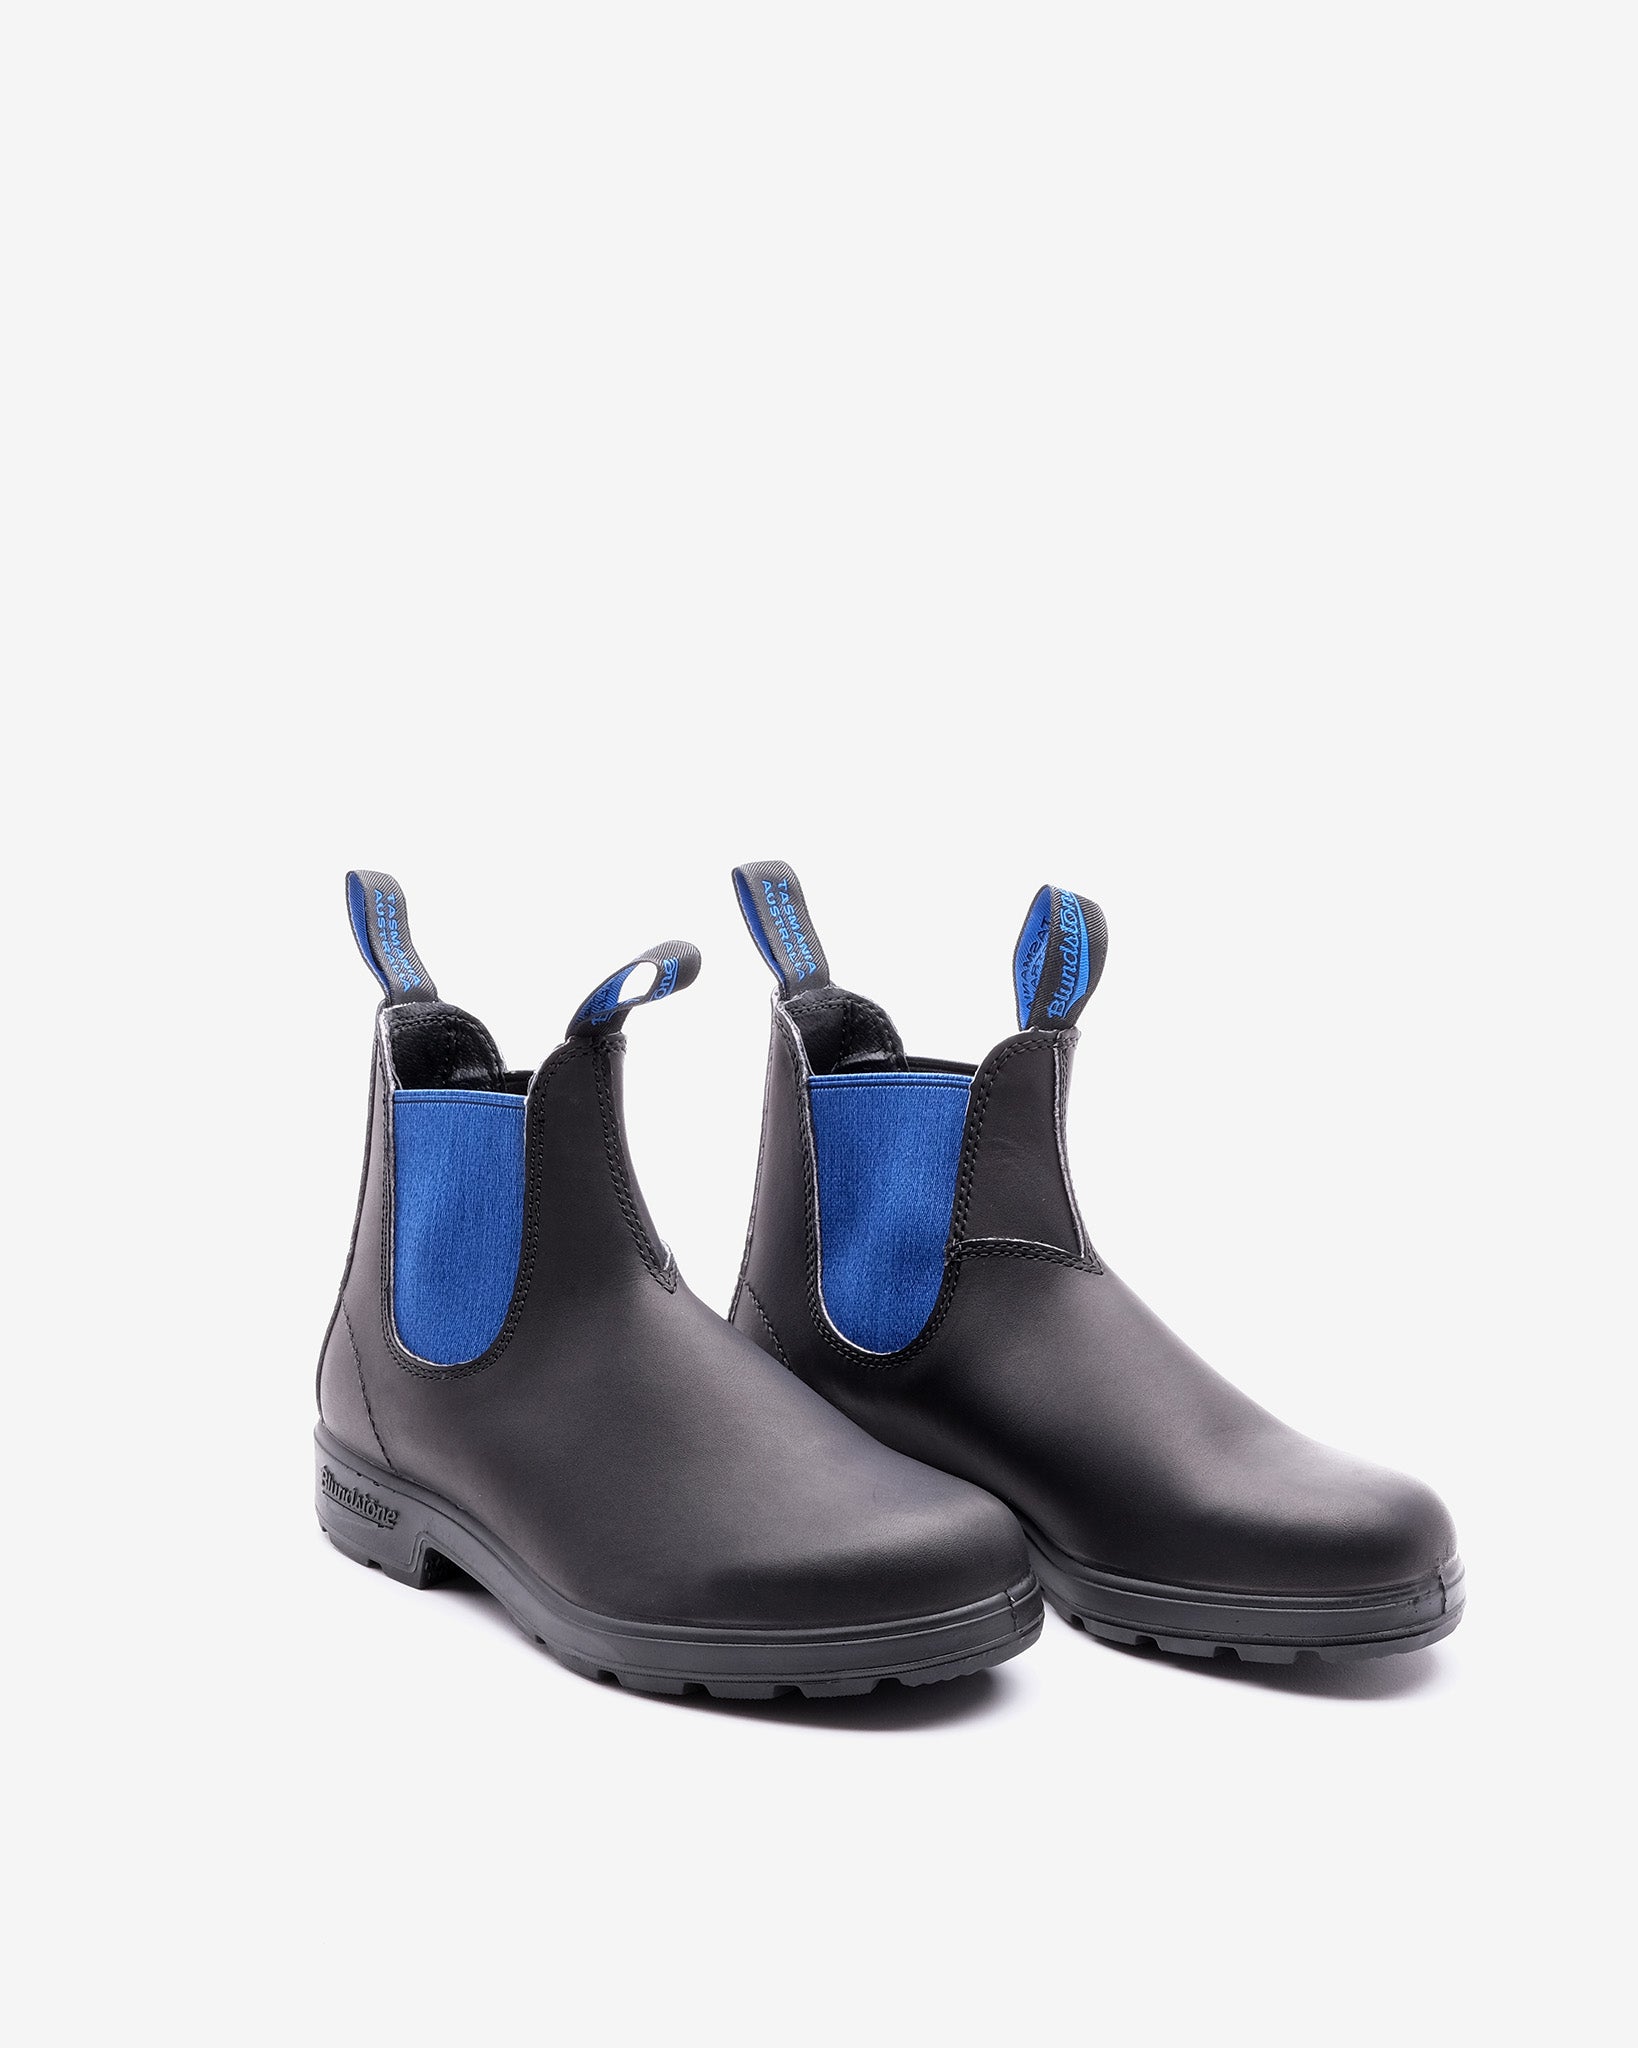 515 Black/Blue Leather Boots